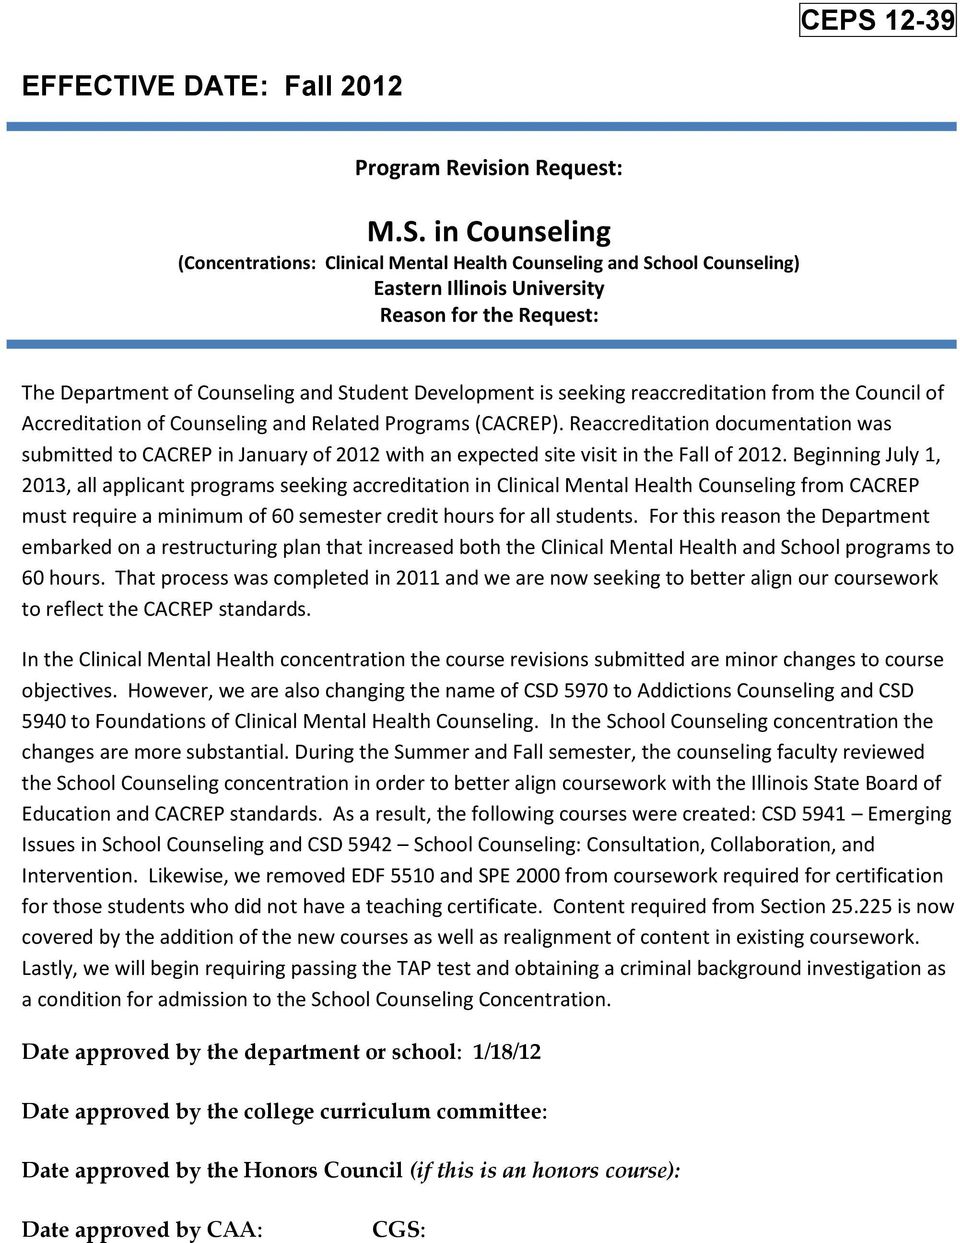 Reaccreditation documentation was submitted to CACREP in January of 2012 with an expected site visit in the Fall of 2012.